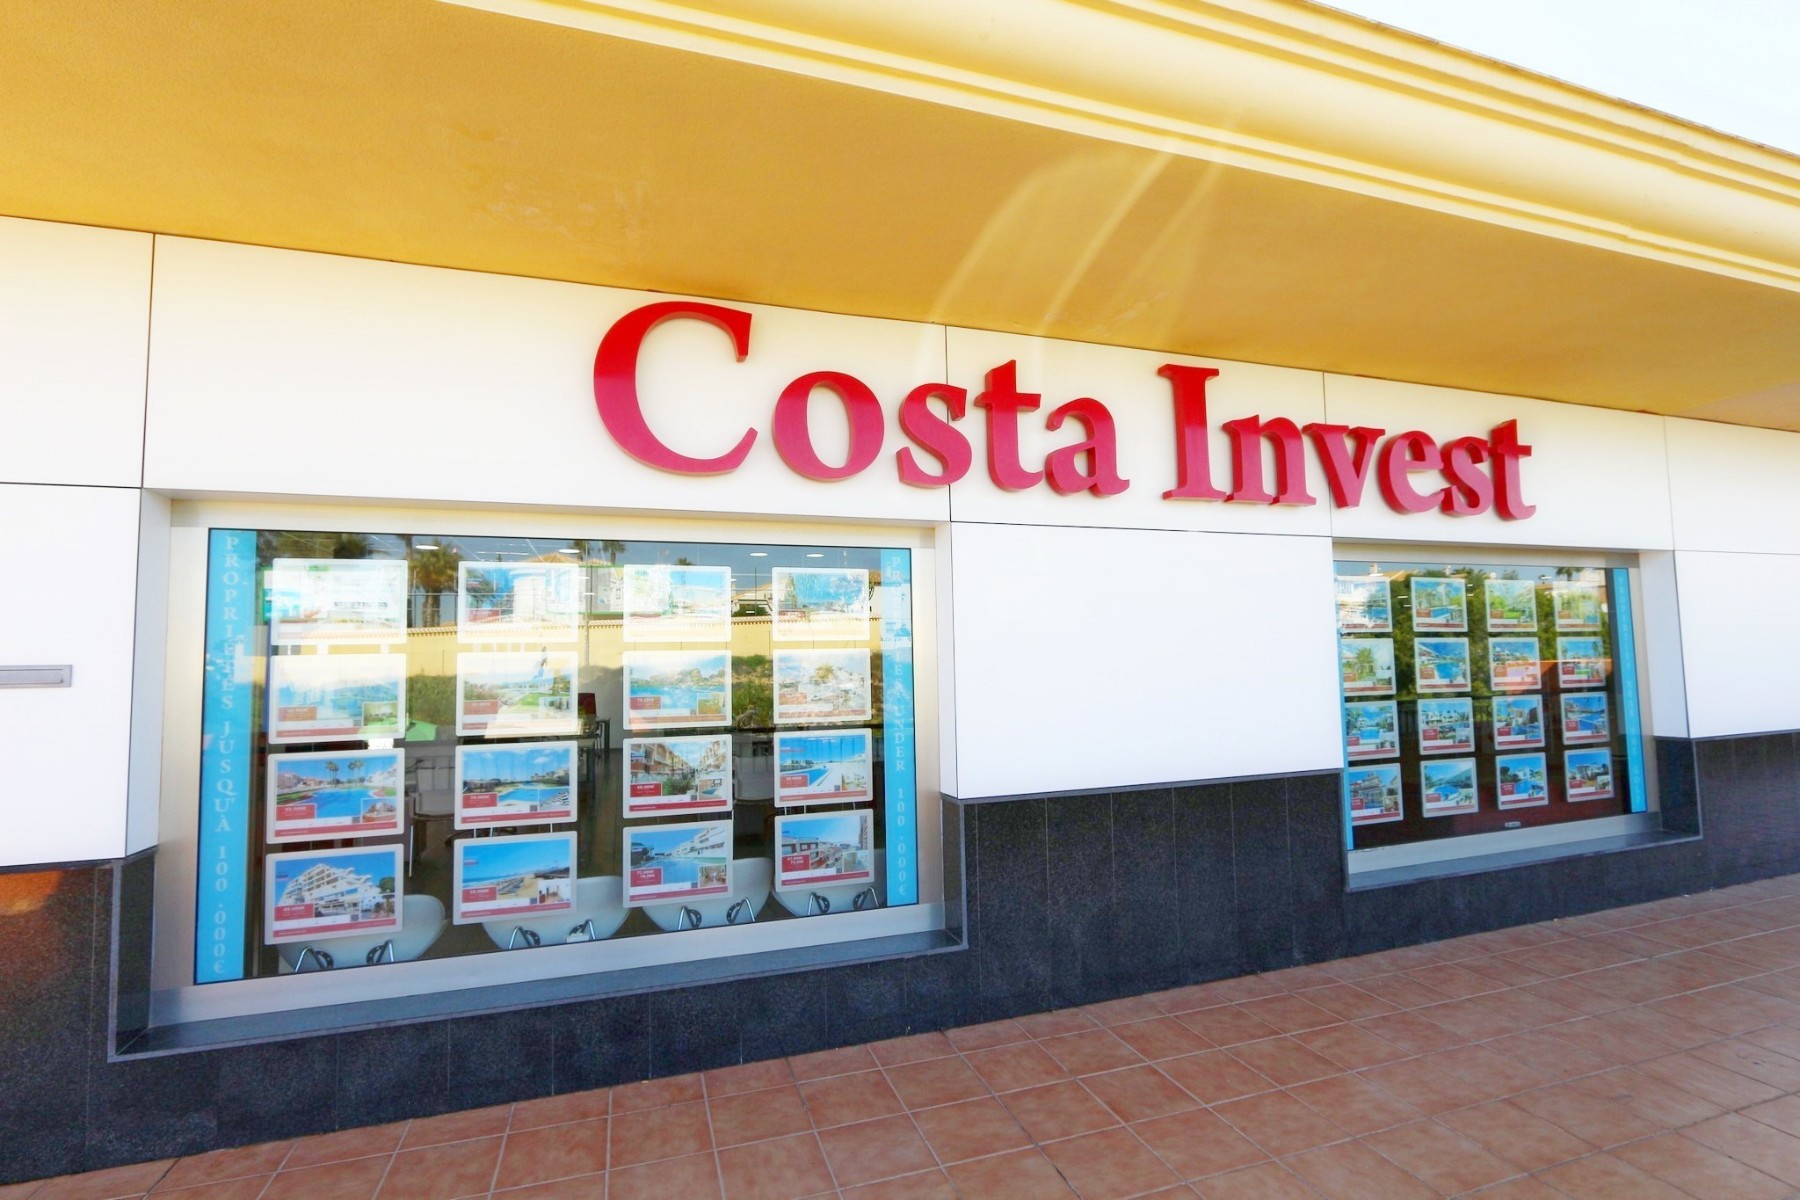 About Costa Invest